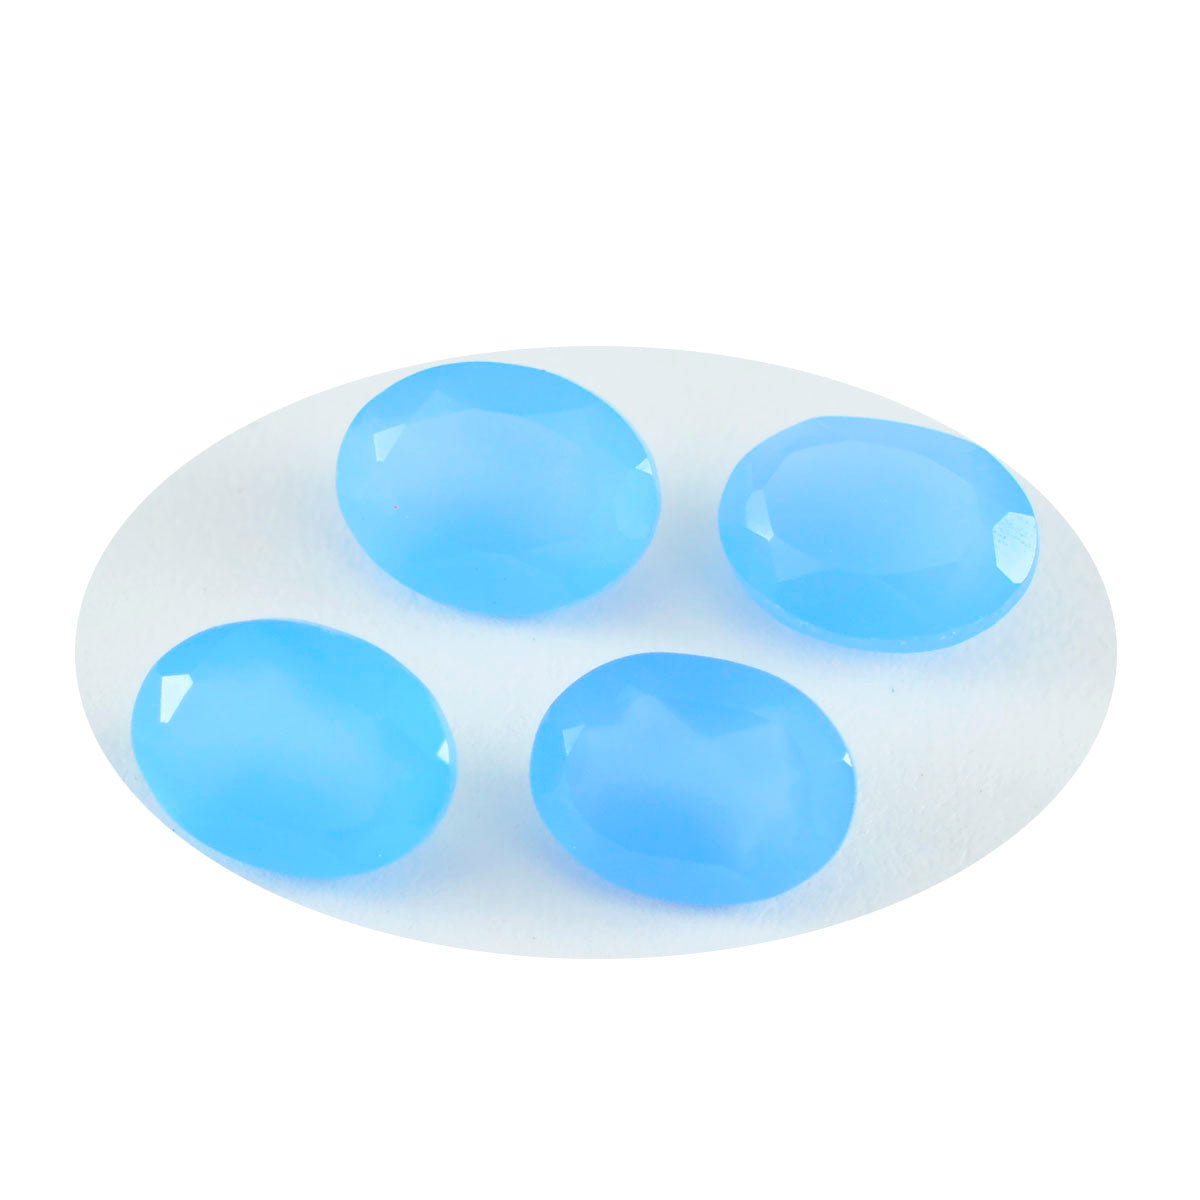 Riyogems 1PC Genuine Blue Chalcedony Faceted 7x9 mm Oval Shape good-looking Quality Loose Gemstone